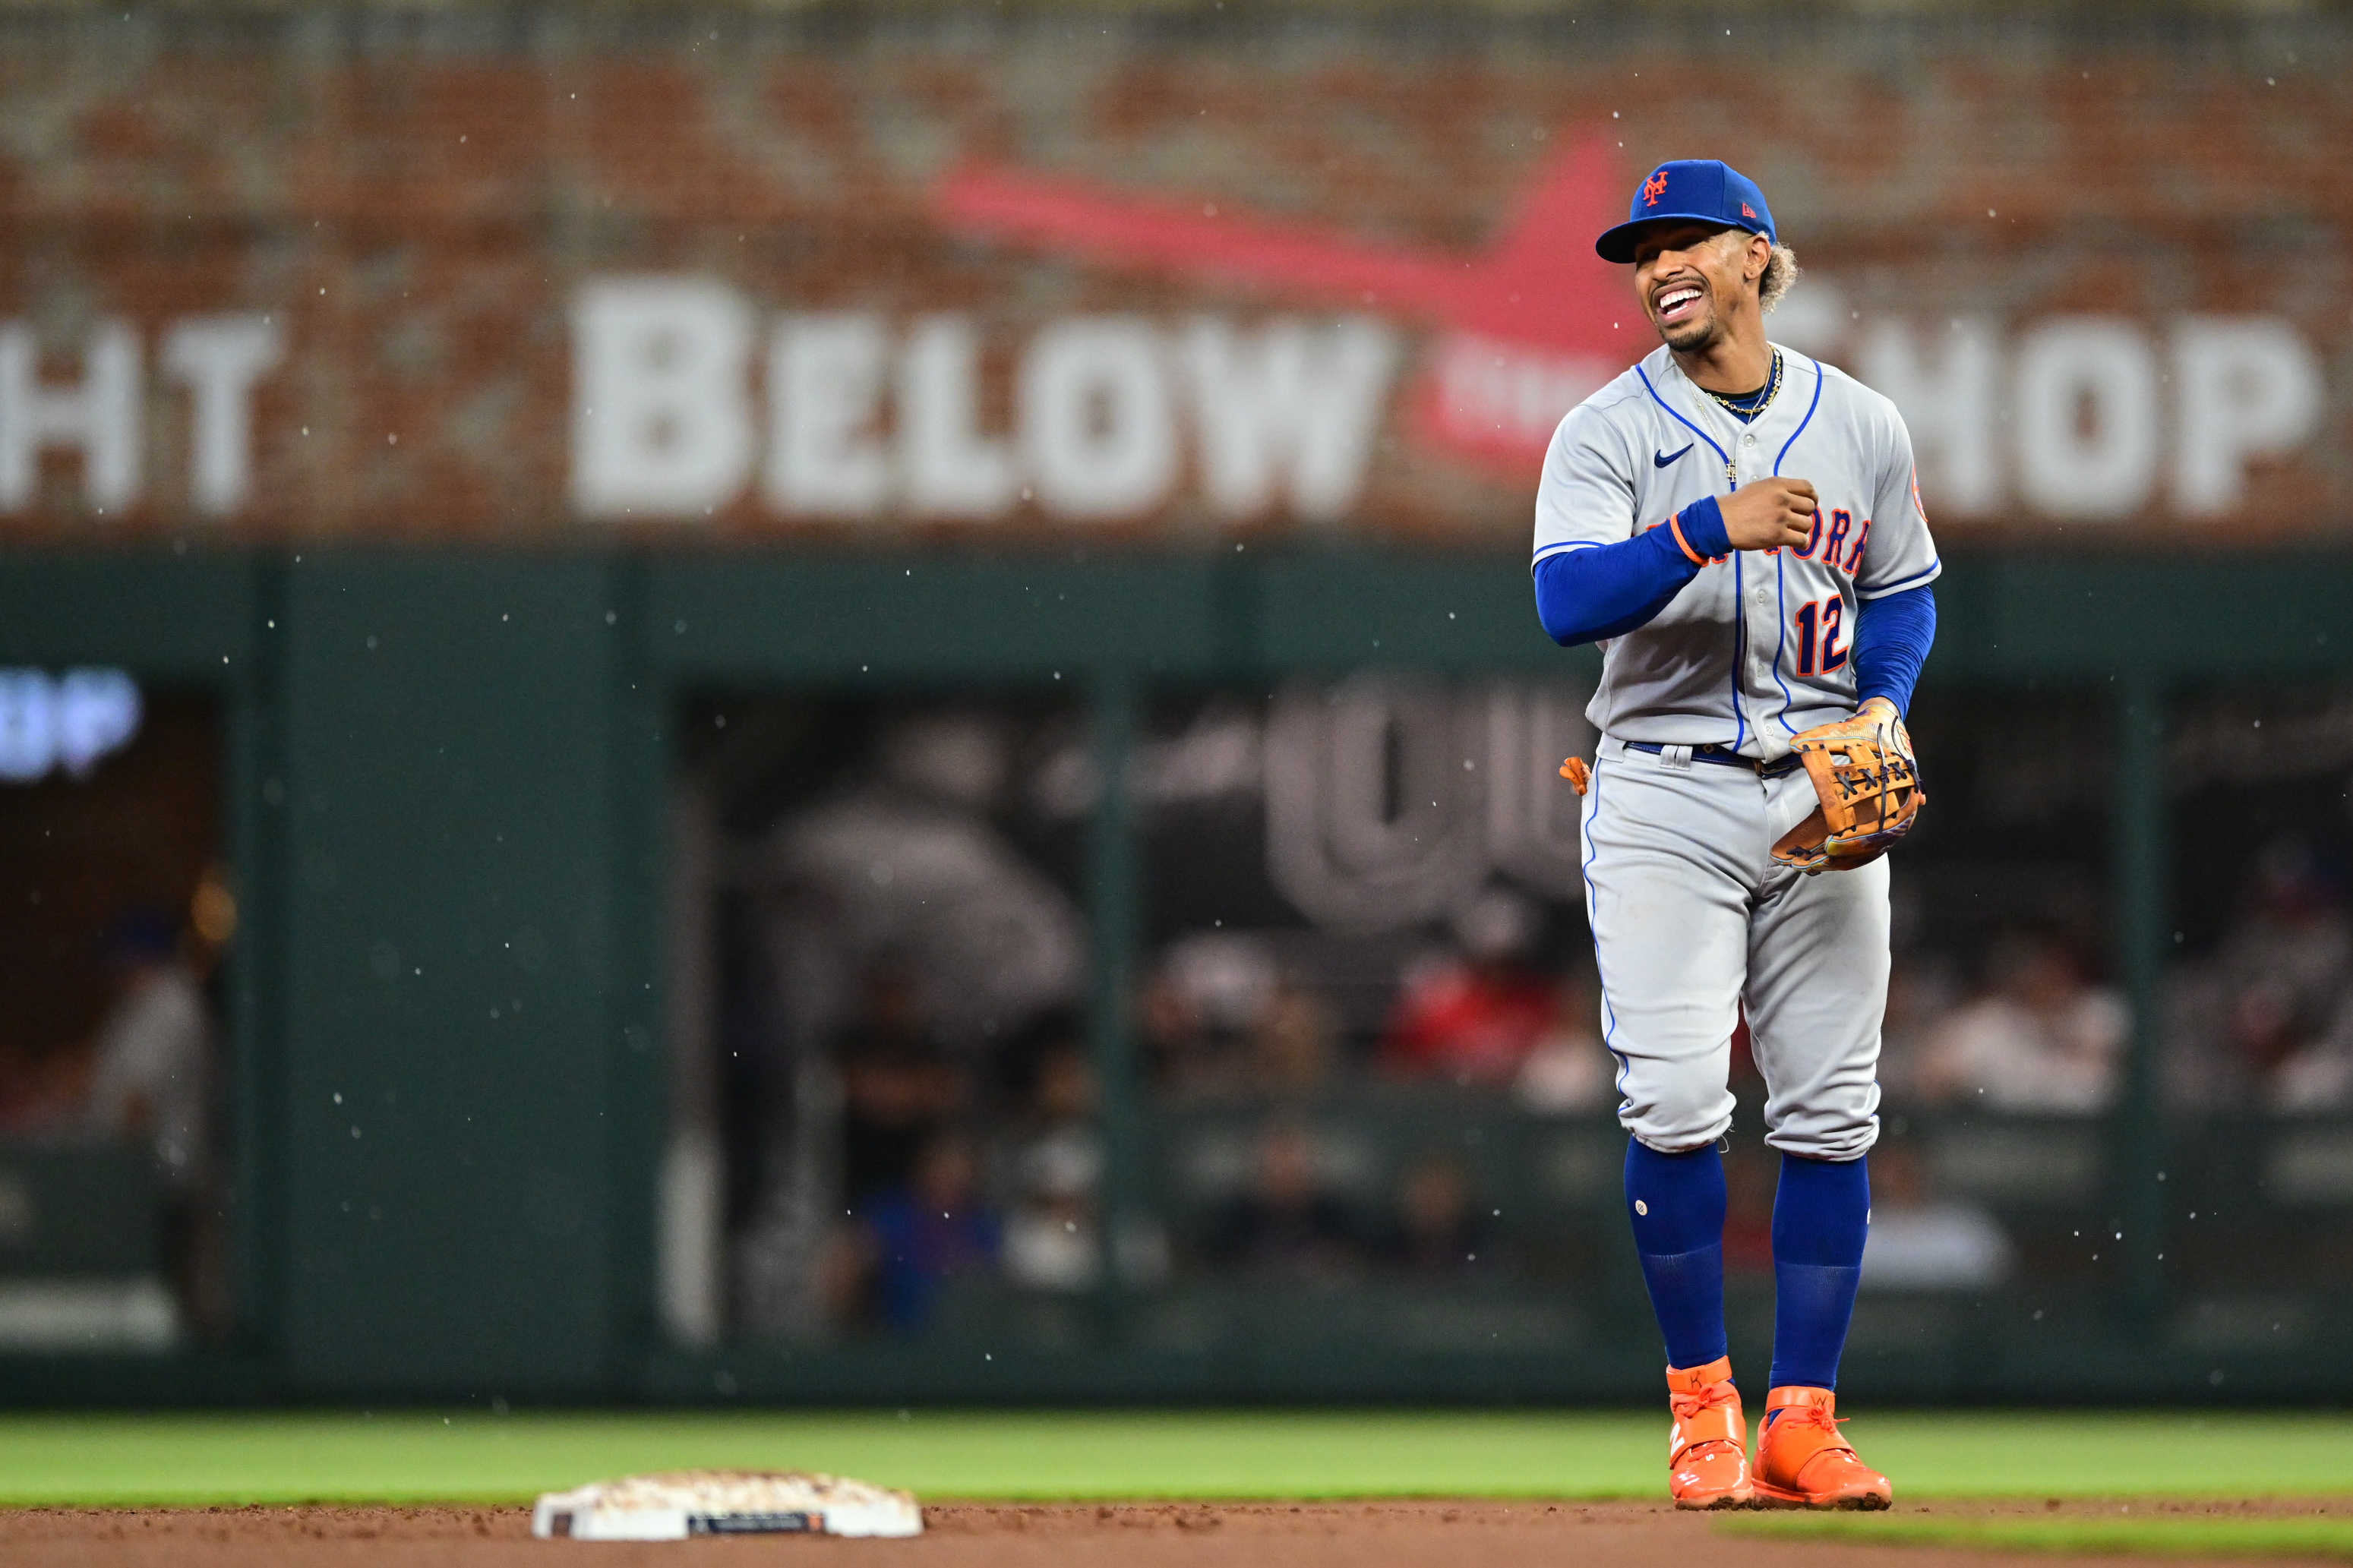 NY Mets offered Francisco Lindor a 10-year, $325 million extension